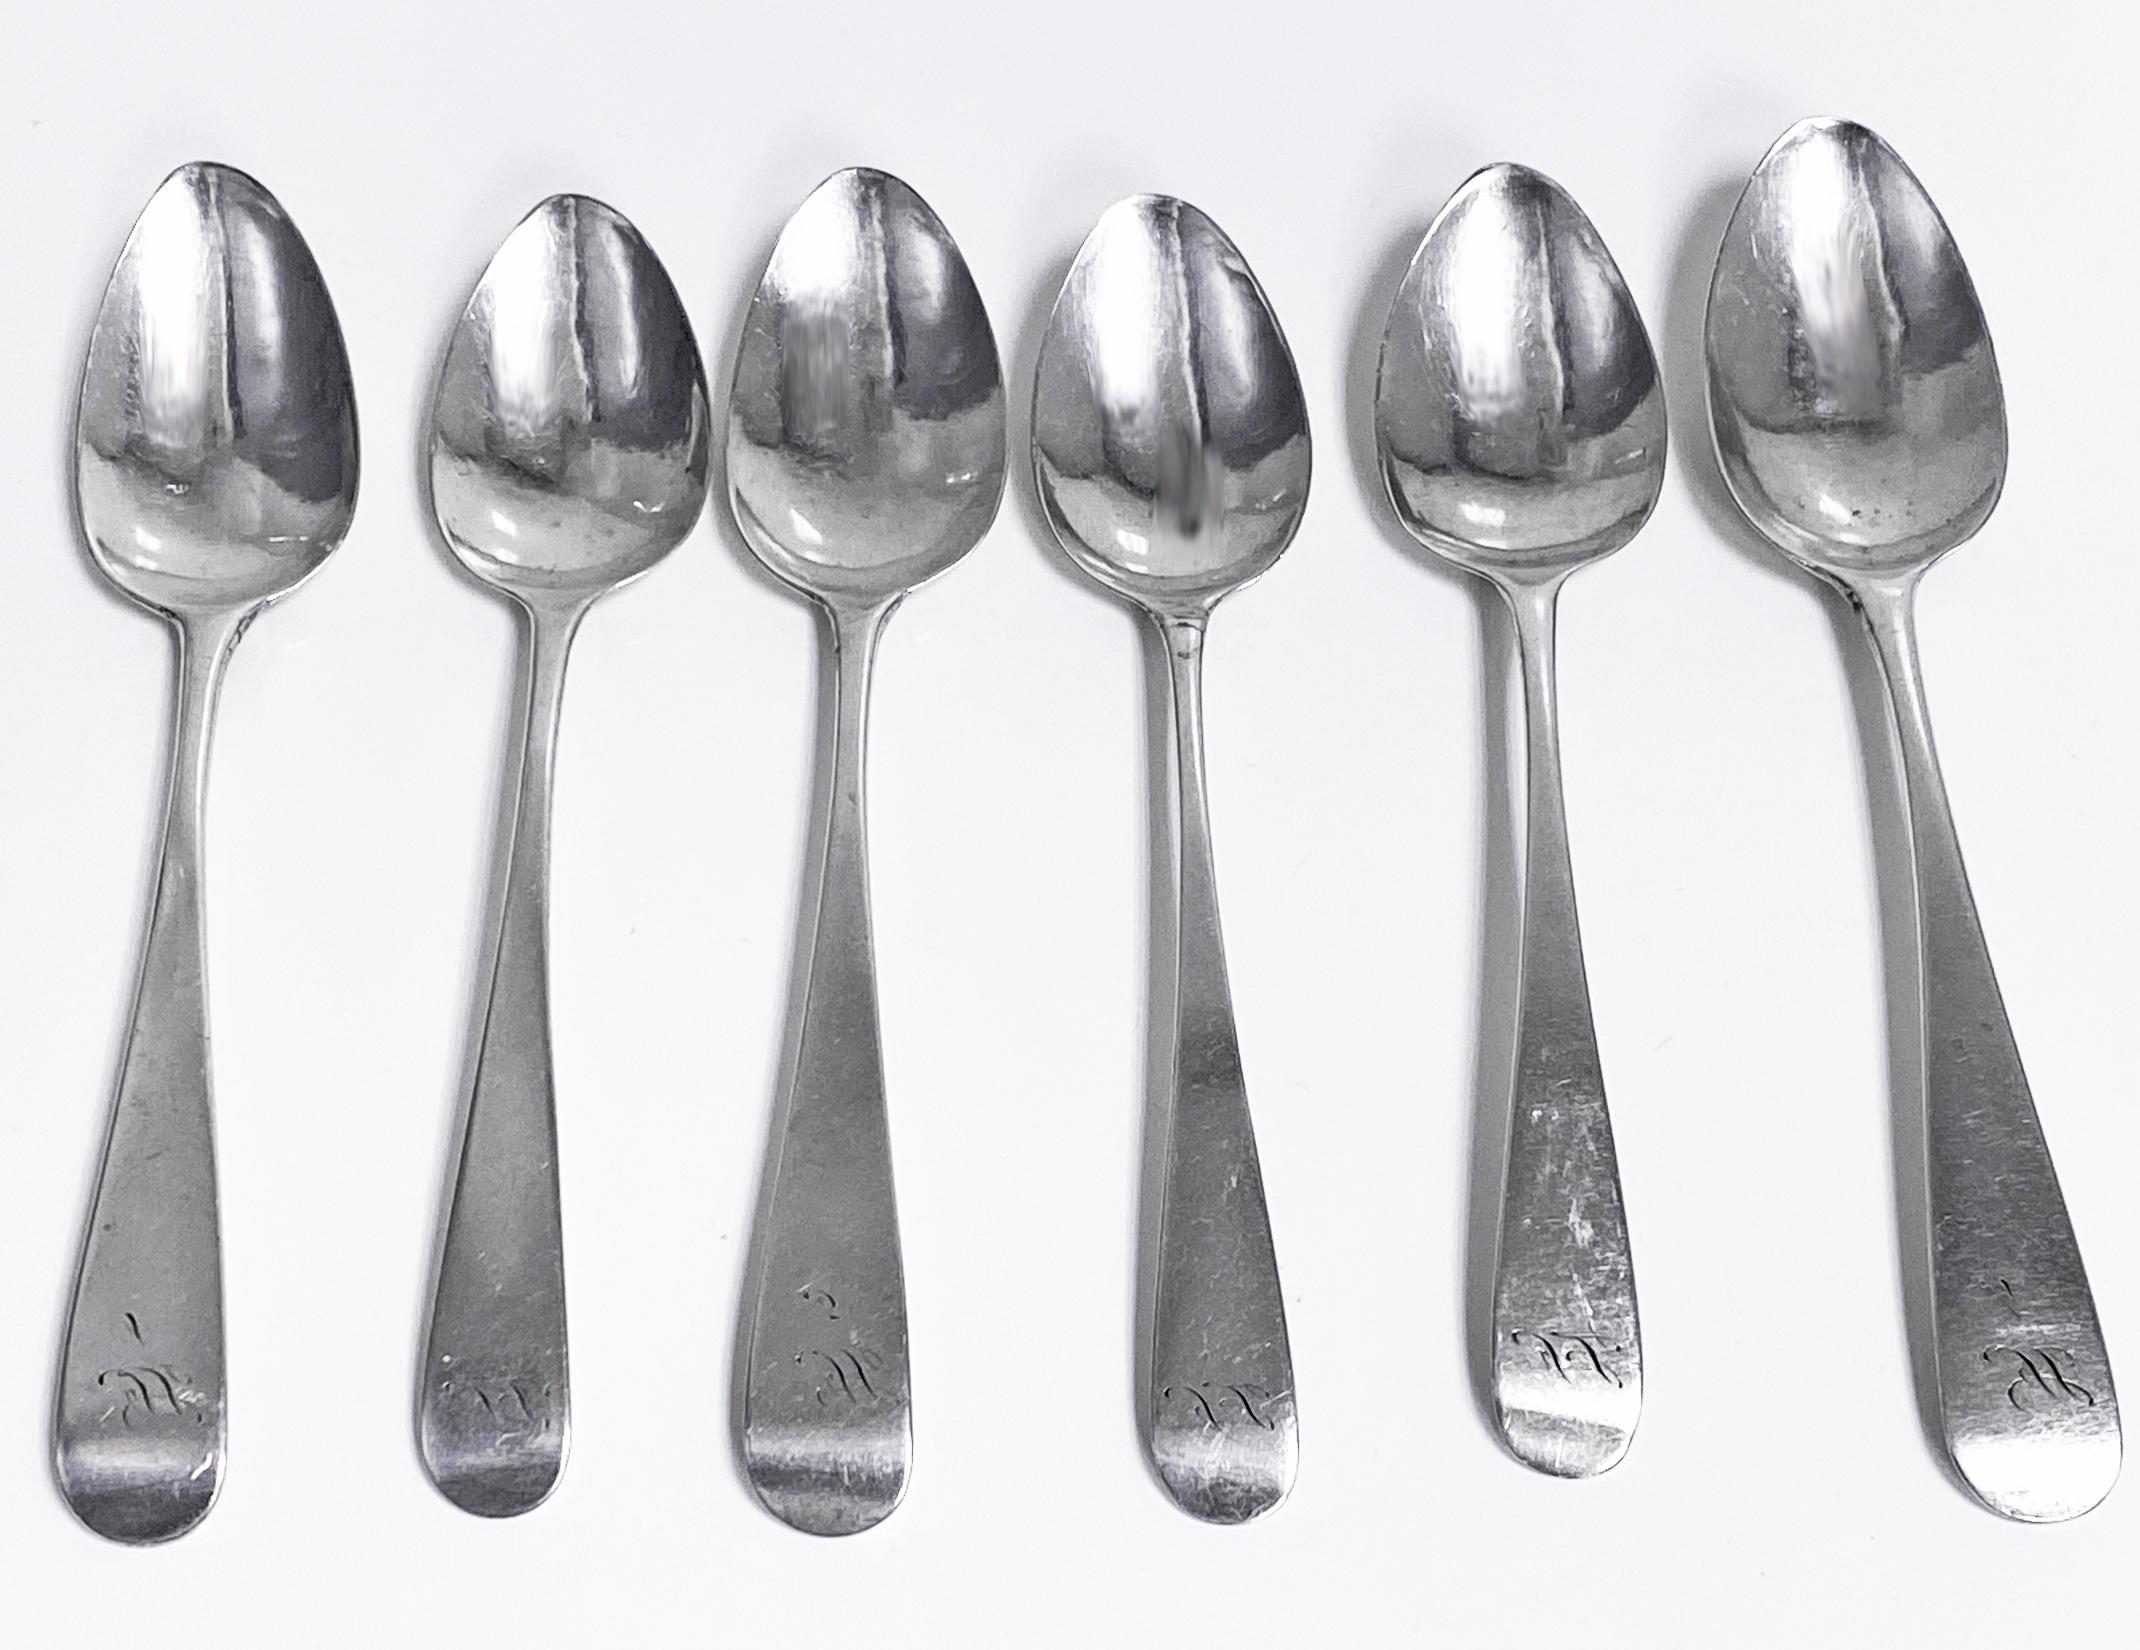 Set 6 Scottish Georgian Silver Old English Spoons Edinburgh C.1808 3 James Gordon of Aberdeen and 3 Mitchell and Russell. Plain light monogram possibly IL. Lengths: 5.25 inches. Weight: 78.33 grams. Condition: light wear commensurate with age.